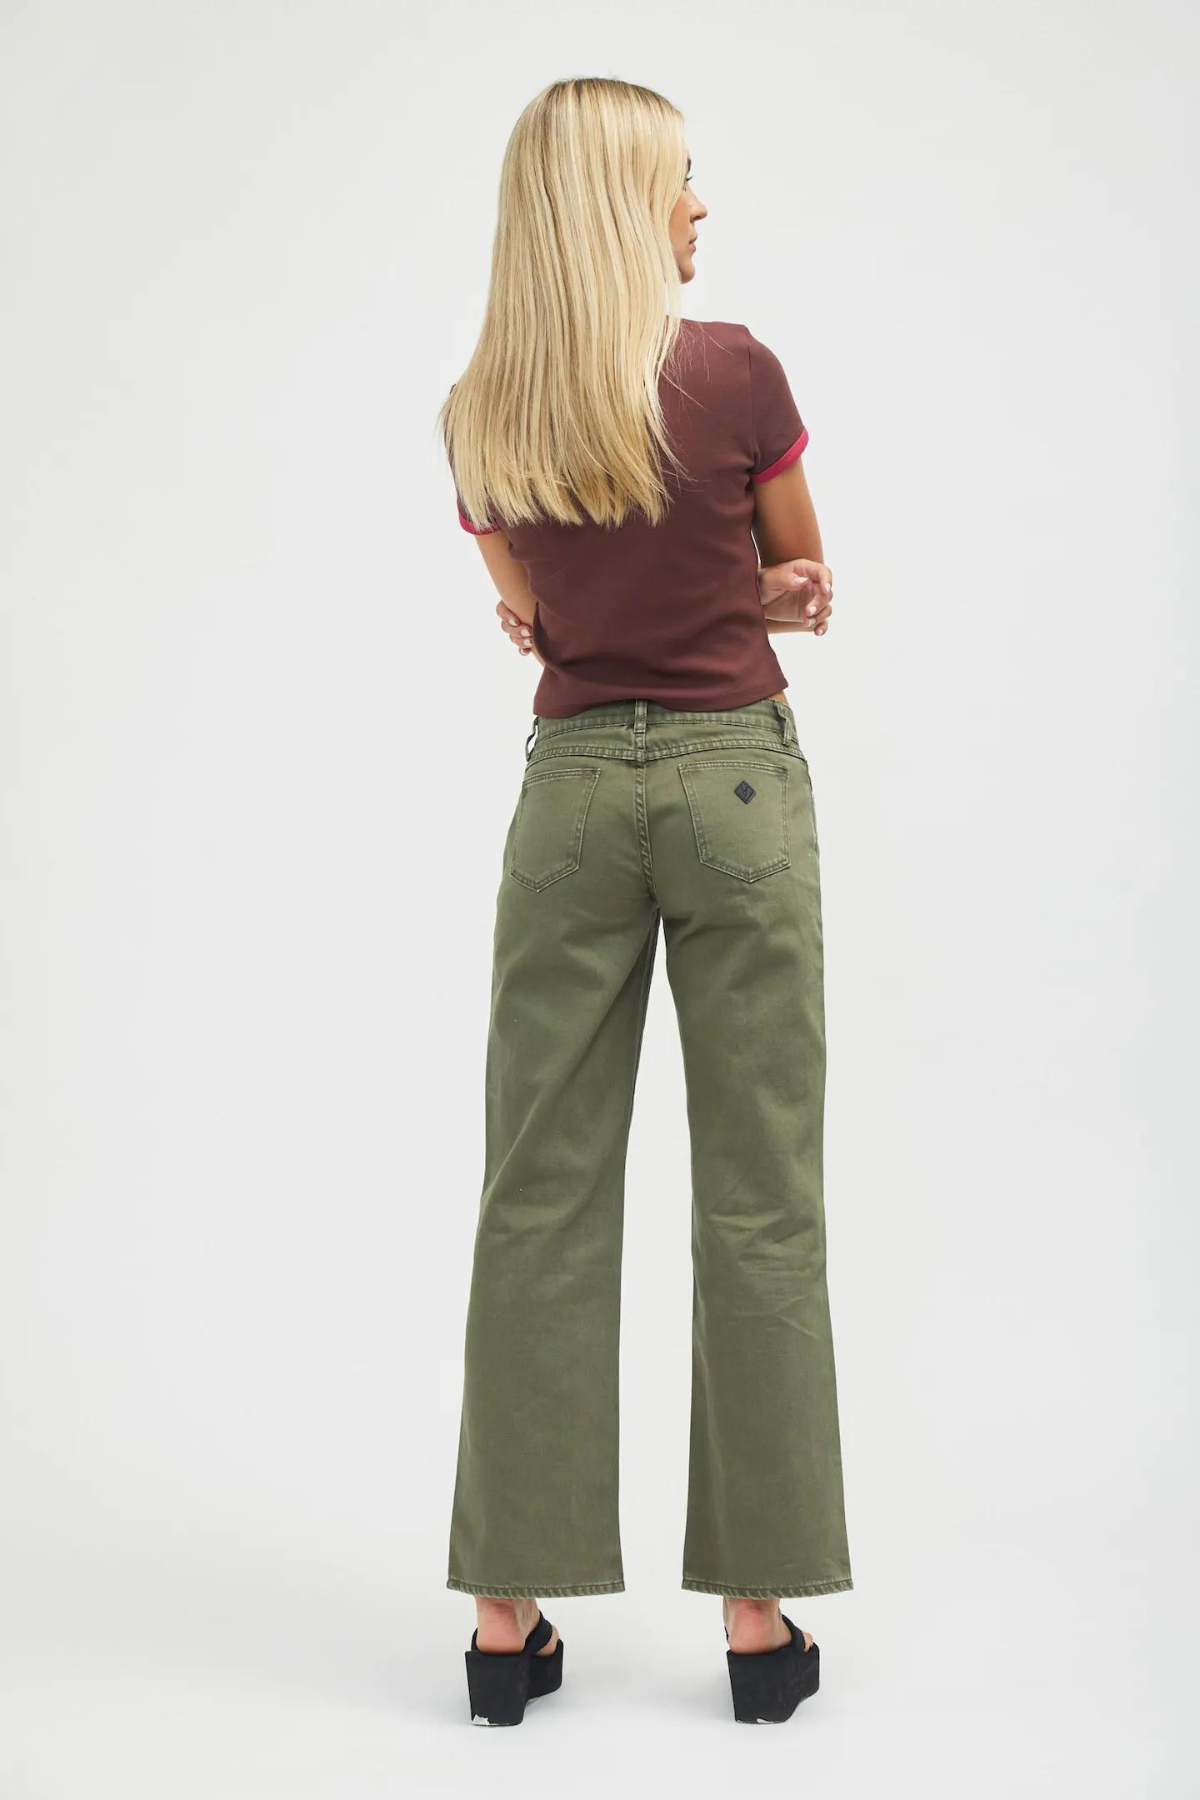 Low and Wide Olive Cargo Pant, Pant Bottom by ABRAND | LIT Boutique